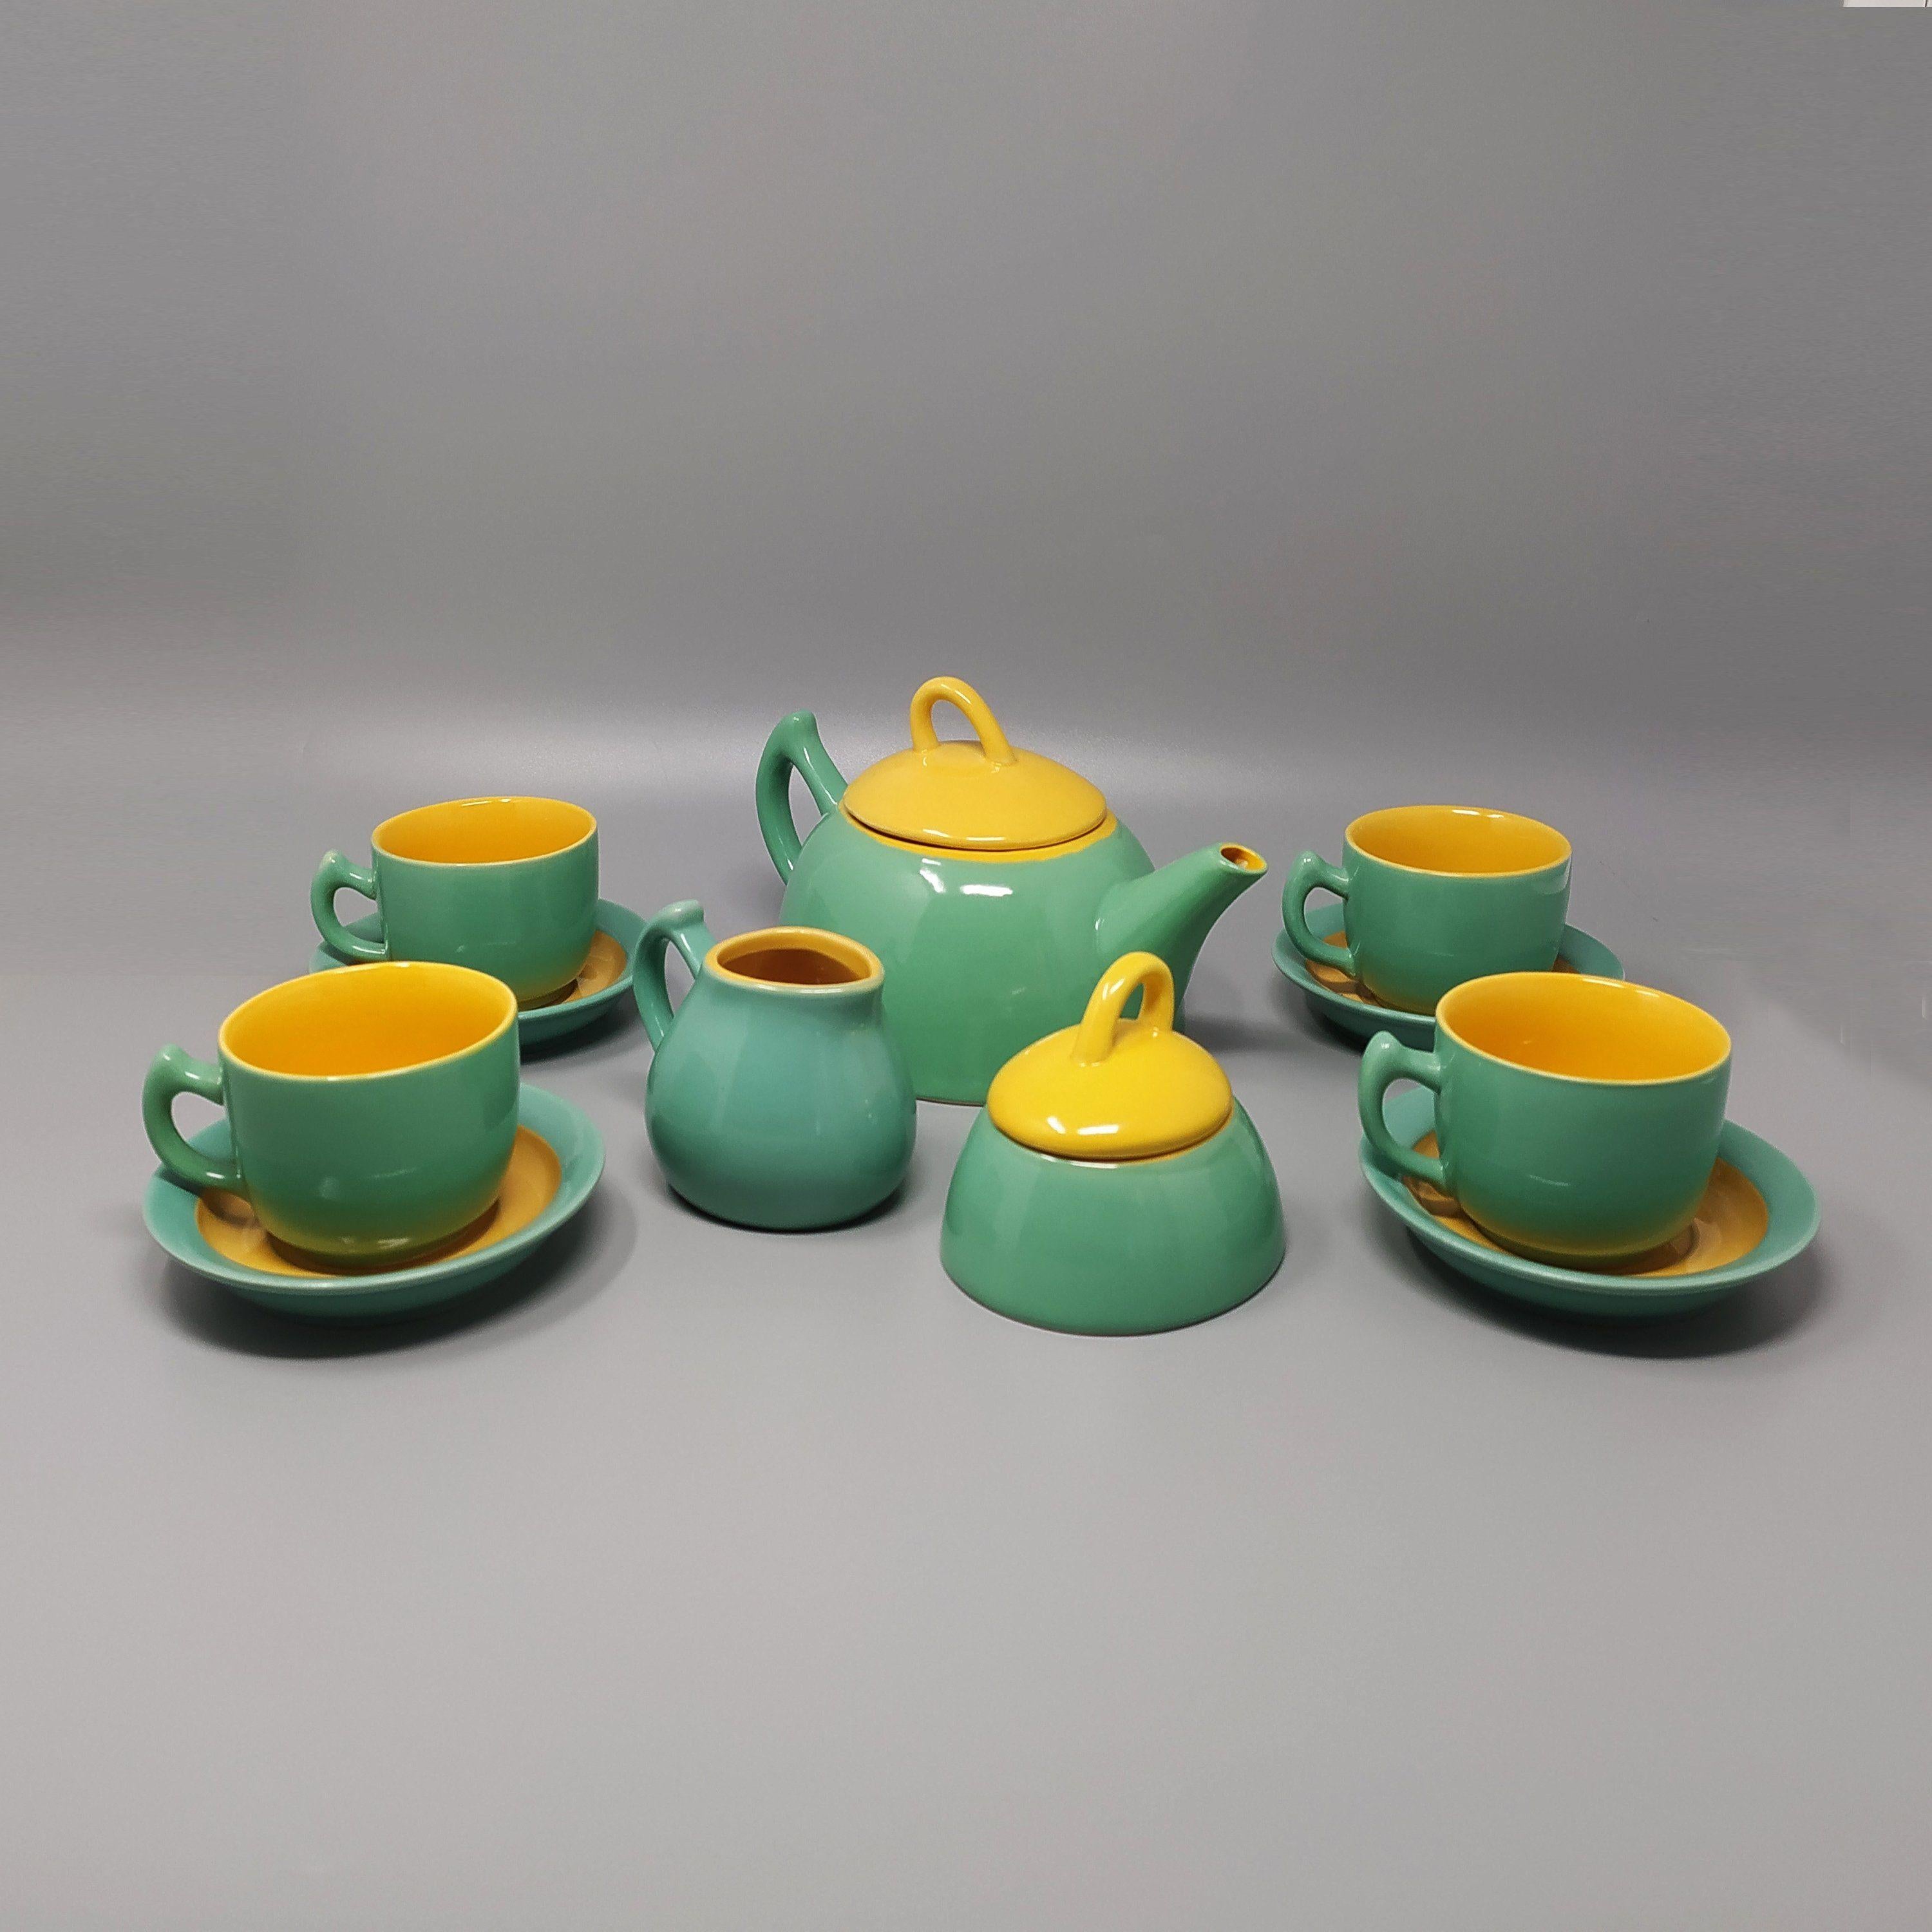 1980s Gorgeous Green and Yellow Tea Set/Coffee Set in Ceramic by Naj Oleari. Made in Italy. The items are in excellent condition

- 1 Coffee/Tea pot 9,05